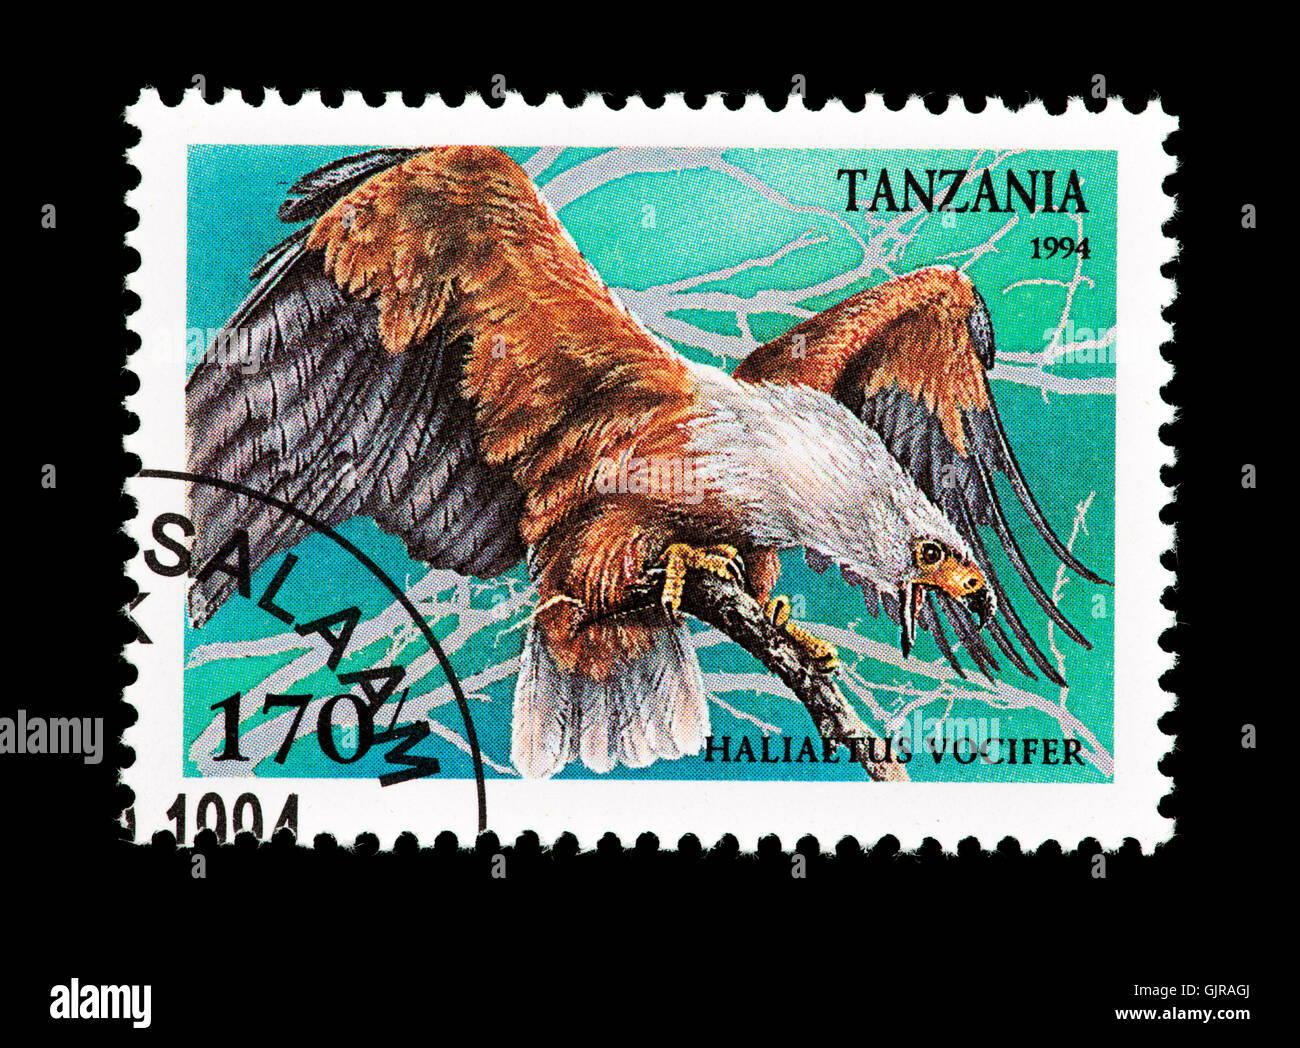 Postage stamp from Tanzania depicting an African fish eagle (Haliaeetus vocifer Stock Photo